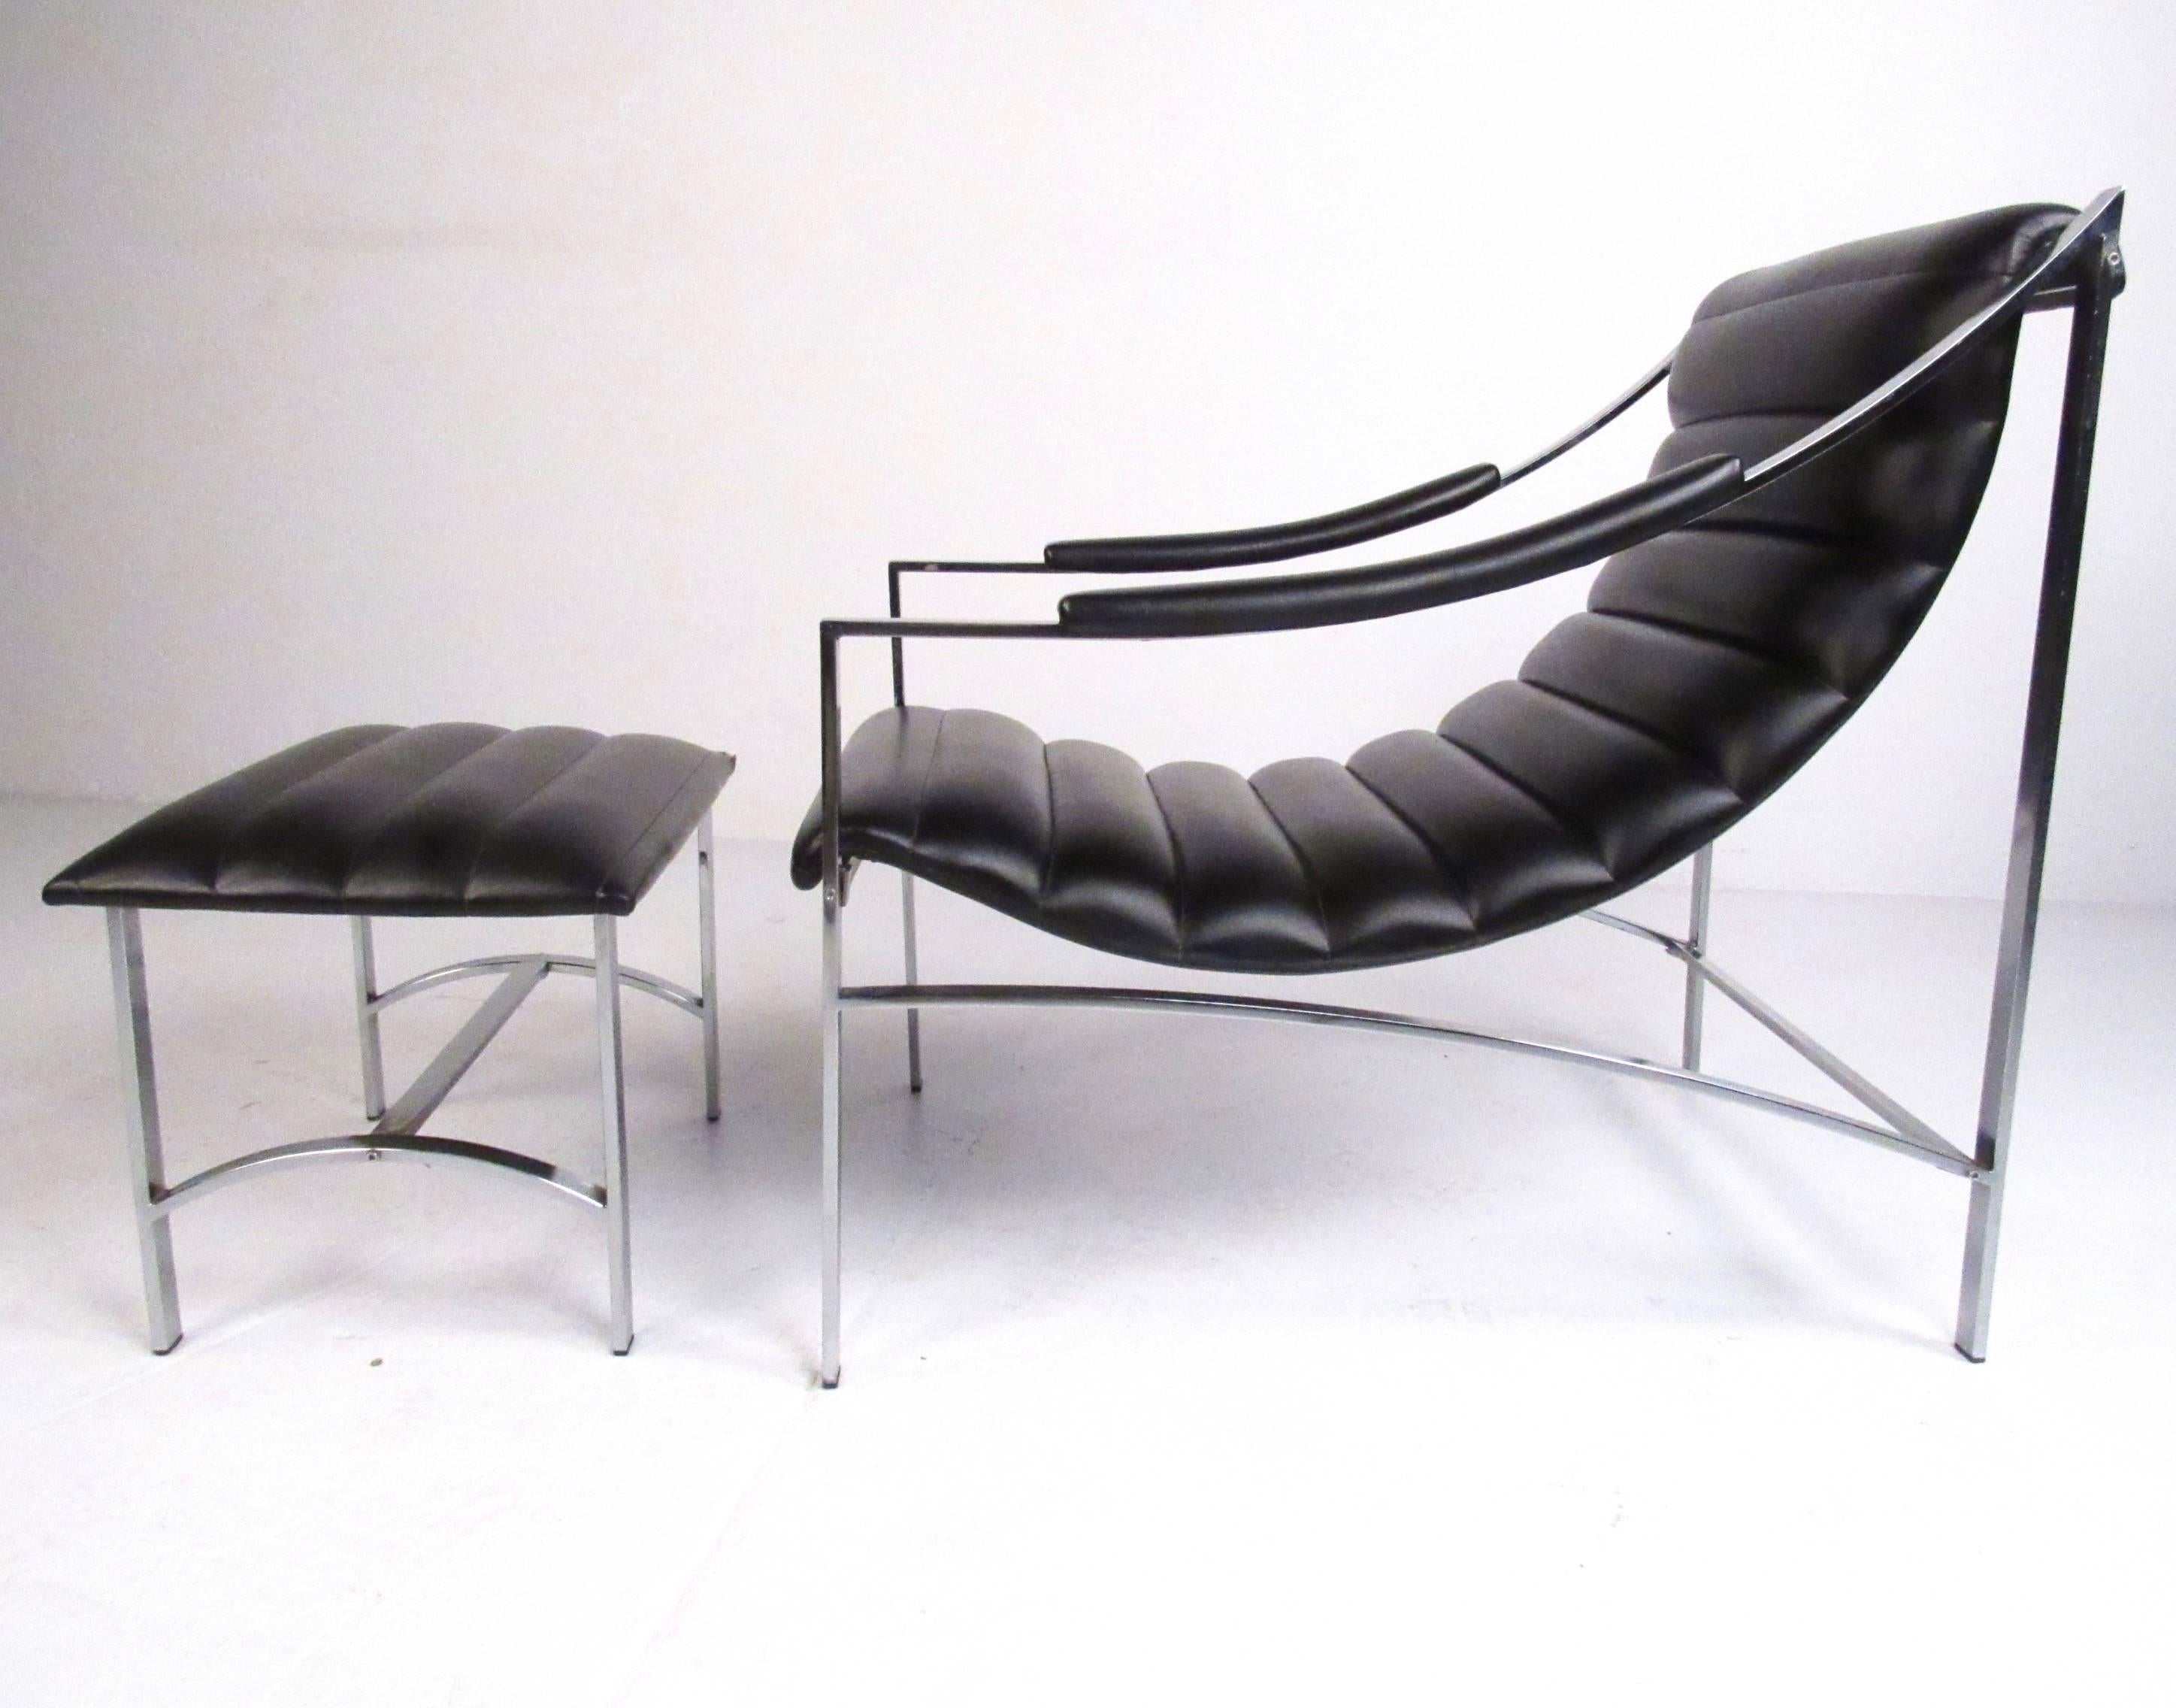 This stylish vintage lounge chair features ribbed vinyl upholstery and sleek chrome frame. Uniquely shaped armrests offer upholstered padding, while the Mid-Century style of the piece echoes Italian modern sensibilities. Please confirm item location